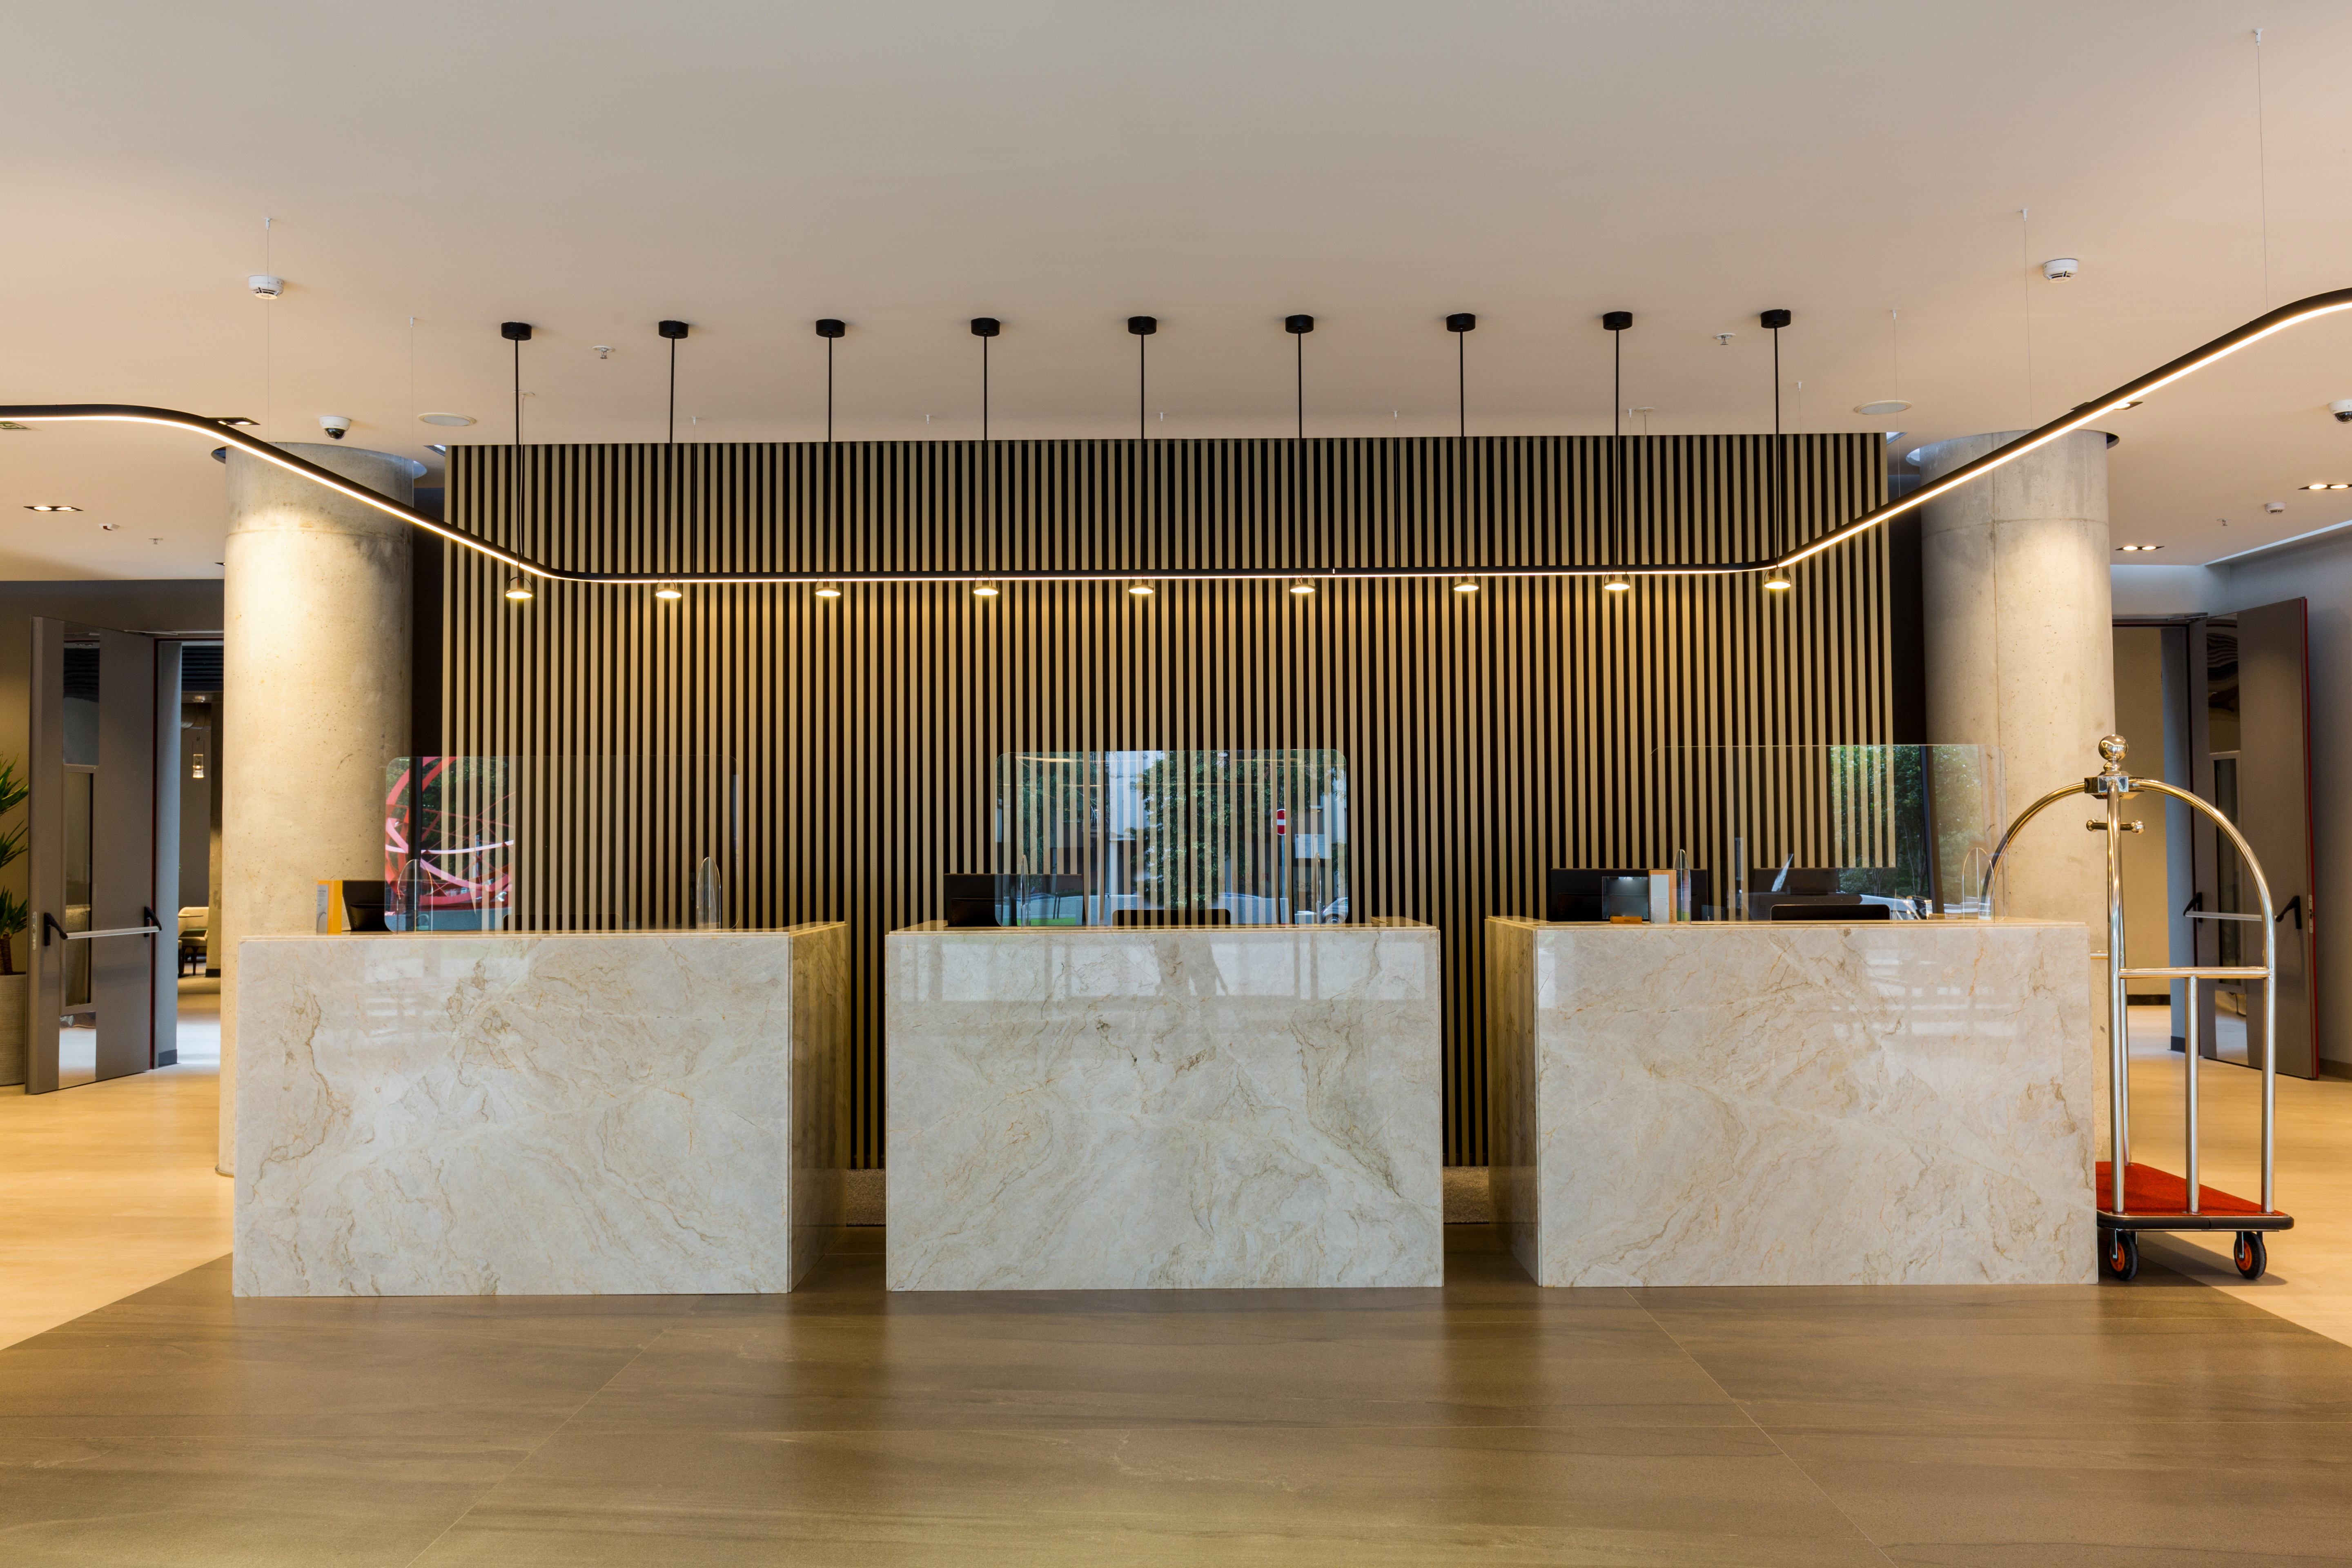 Interior of a hotel lobby with reception desks. | Source: Shutterstock